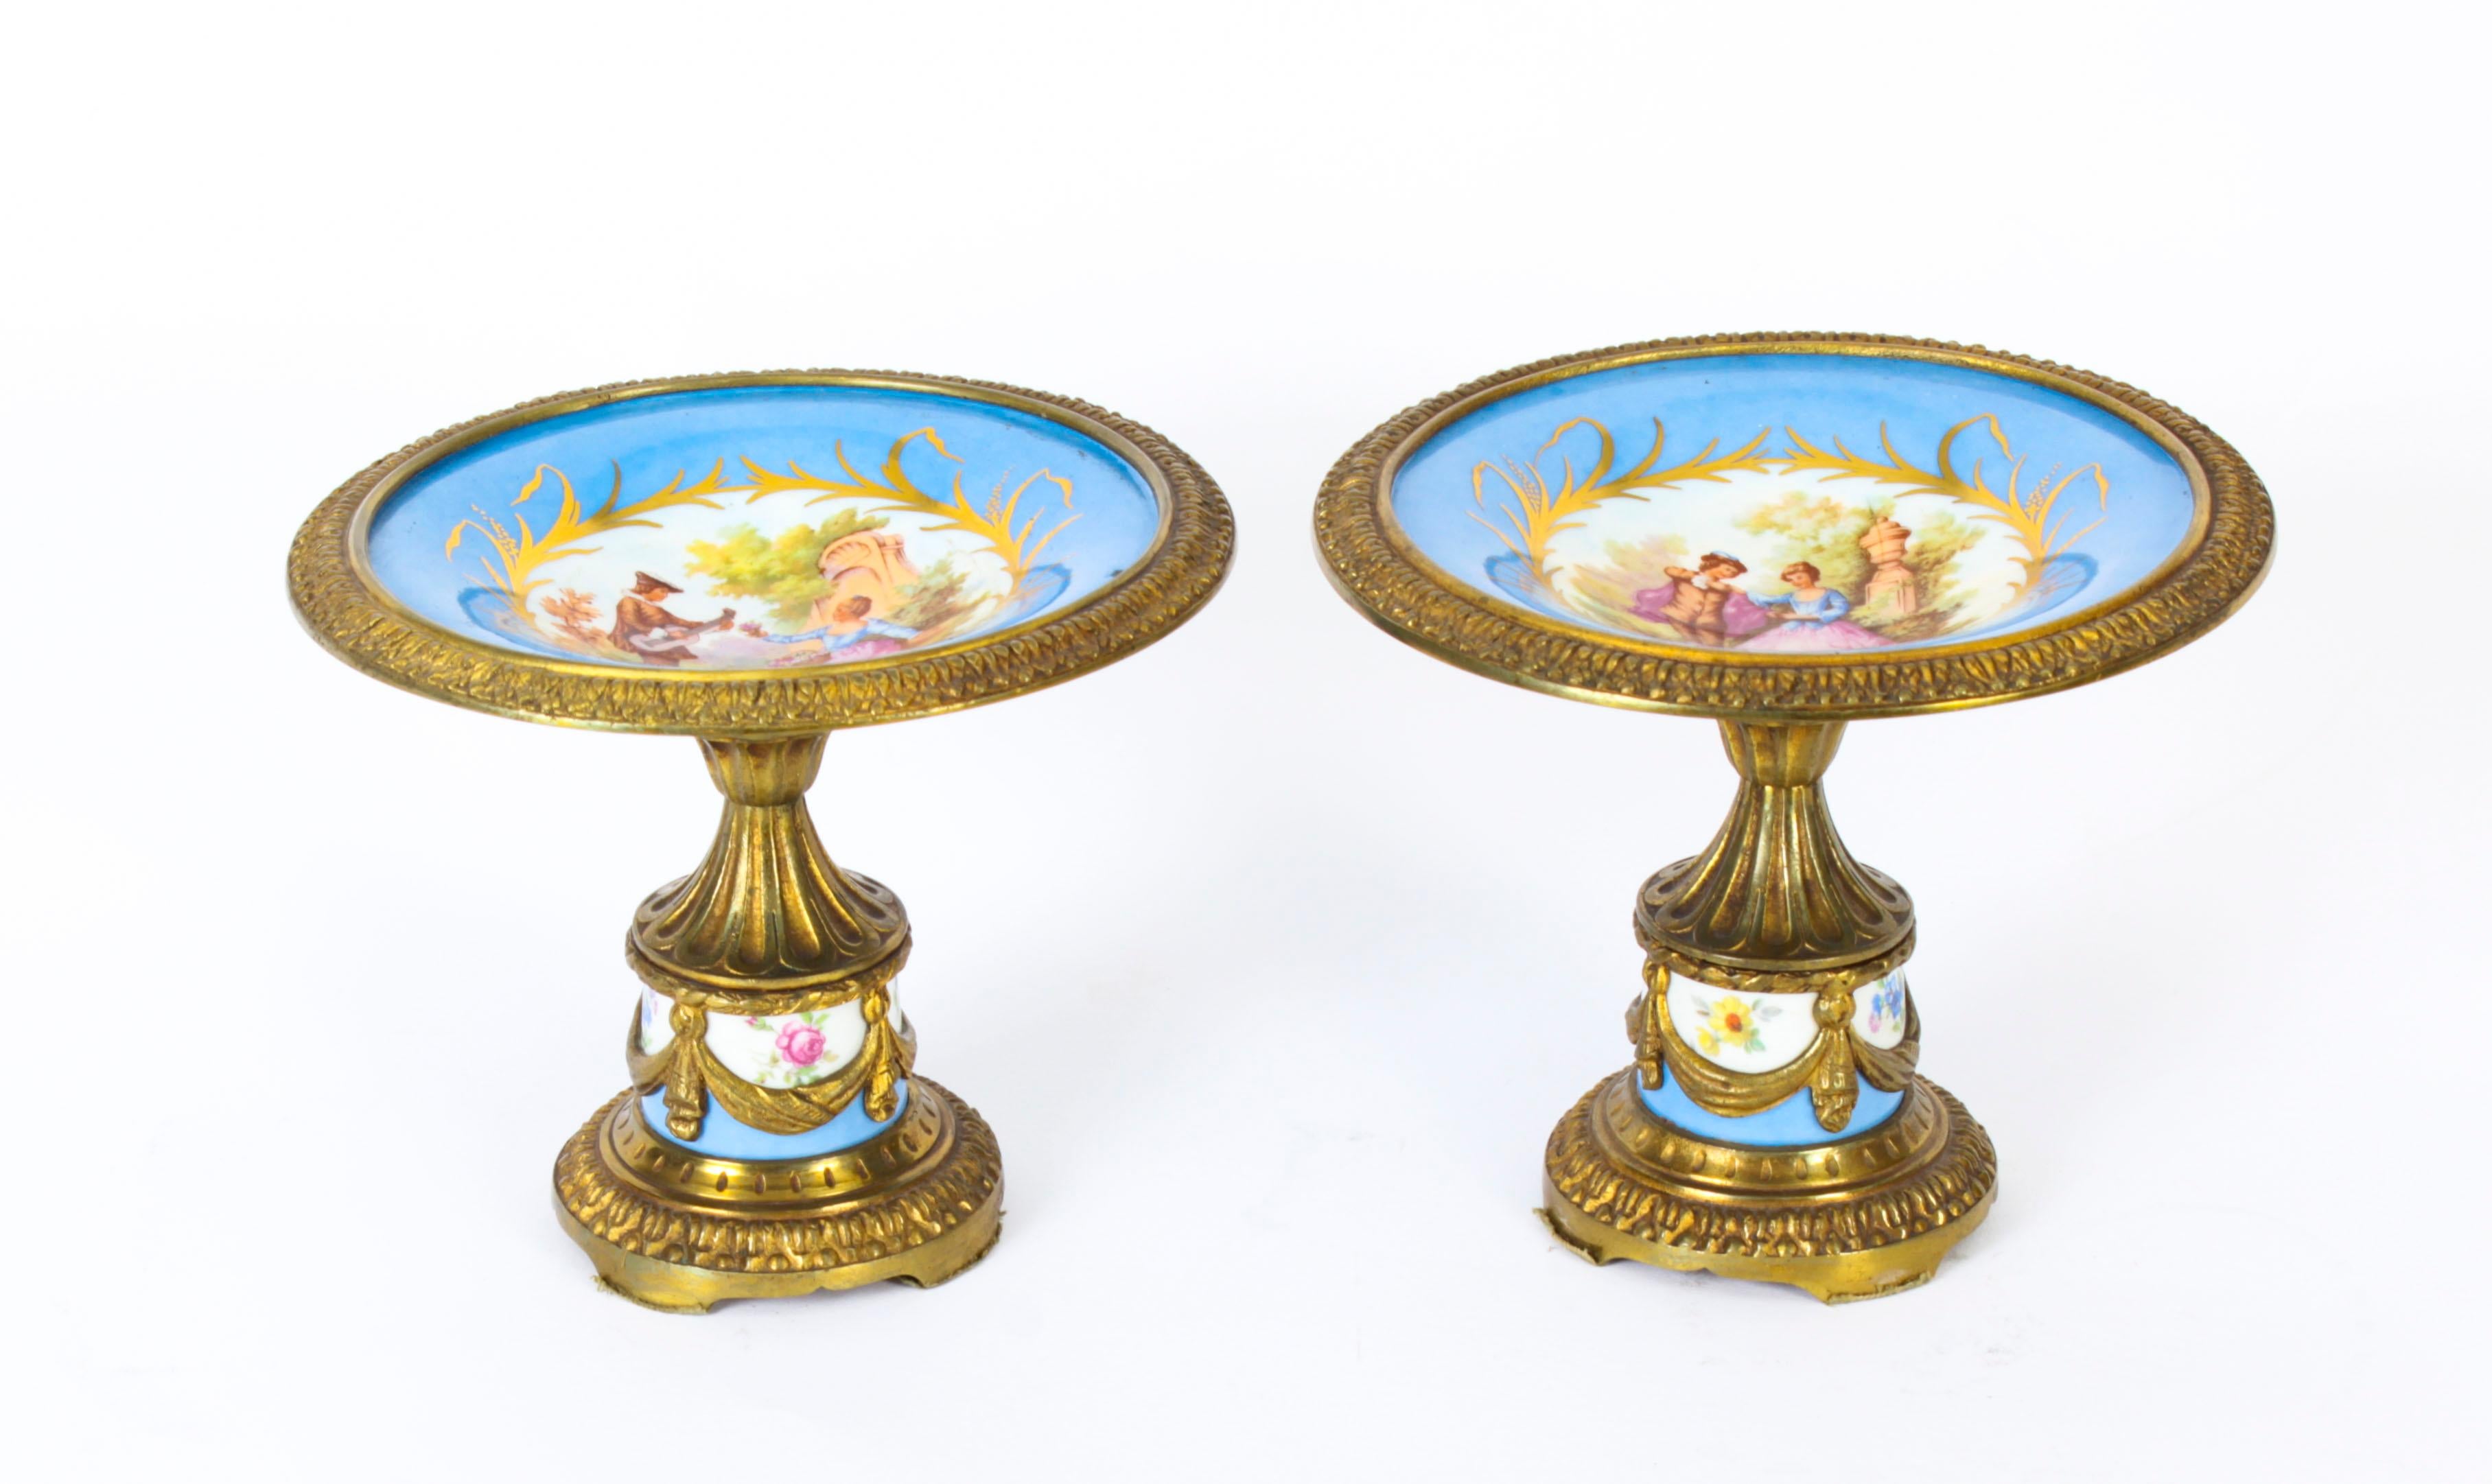 This is a beautiful antique pair of French ormolu mounted Sevres porcelain tazzas, in the Louis XV manner, Circa 1870 in date.
 
The tazzas with a bleu celeste ground are superbly decorated with circular painted panels depicting romantic courting